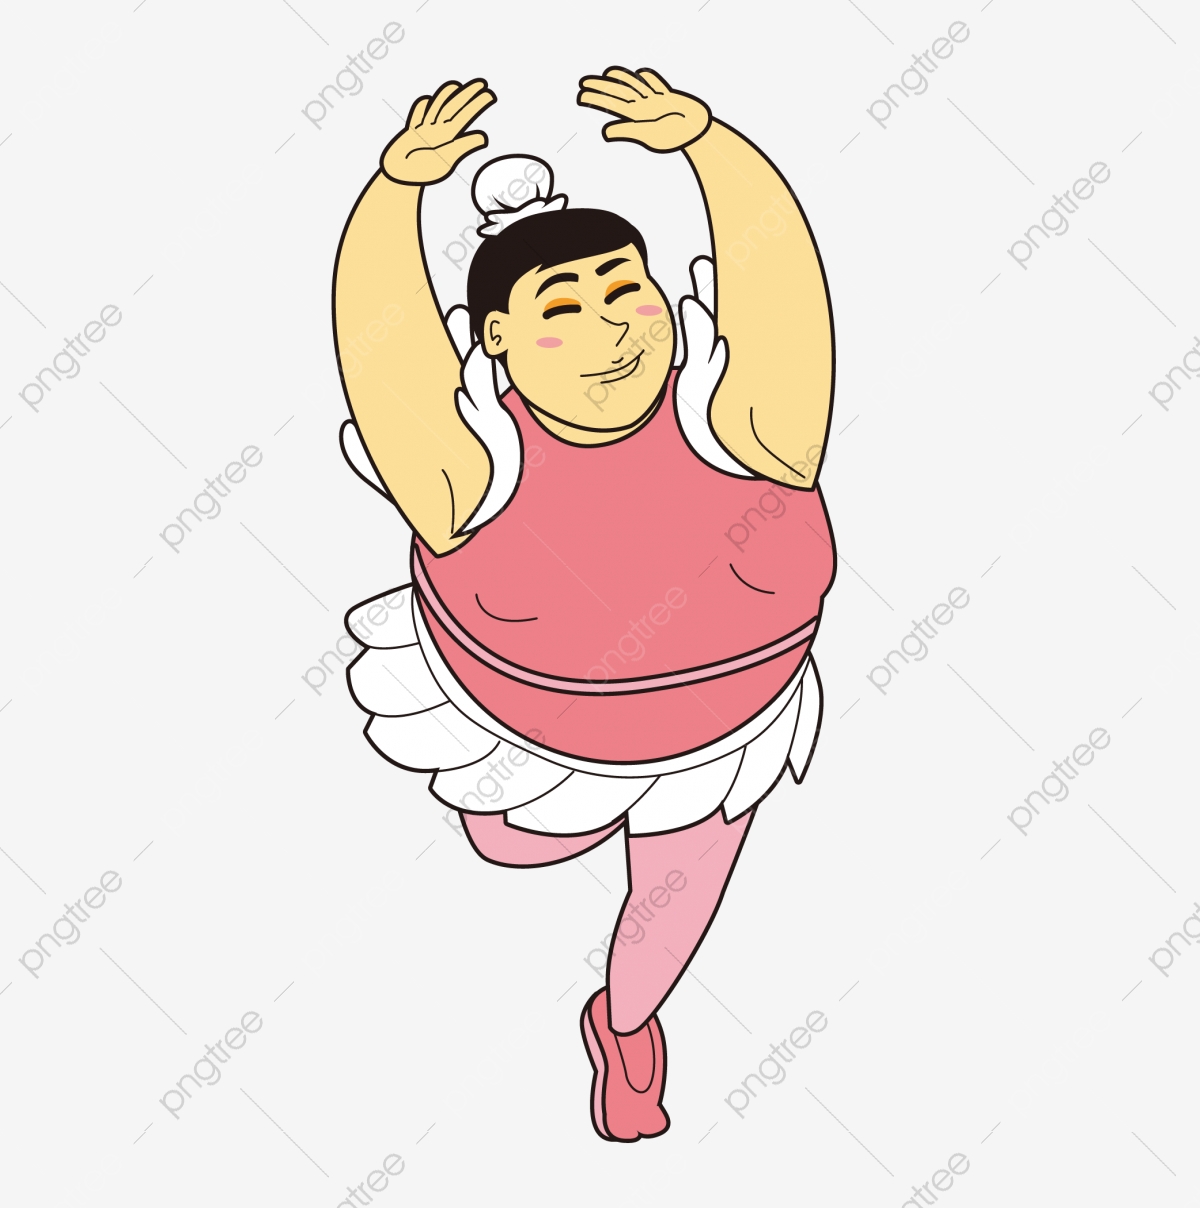 Cartoon hand painted body. Movement clipart action